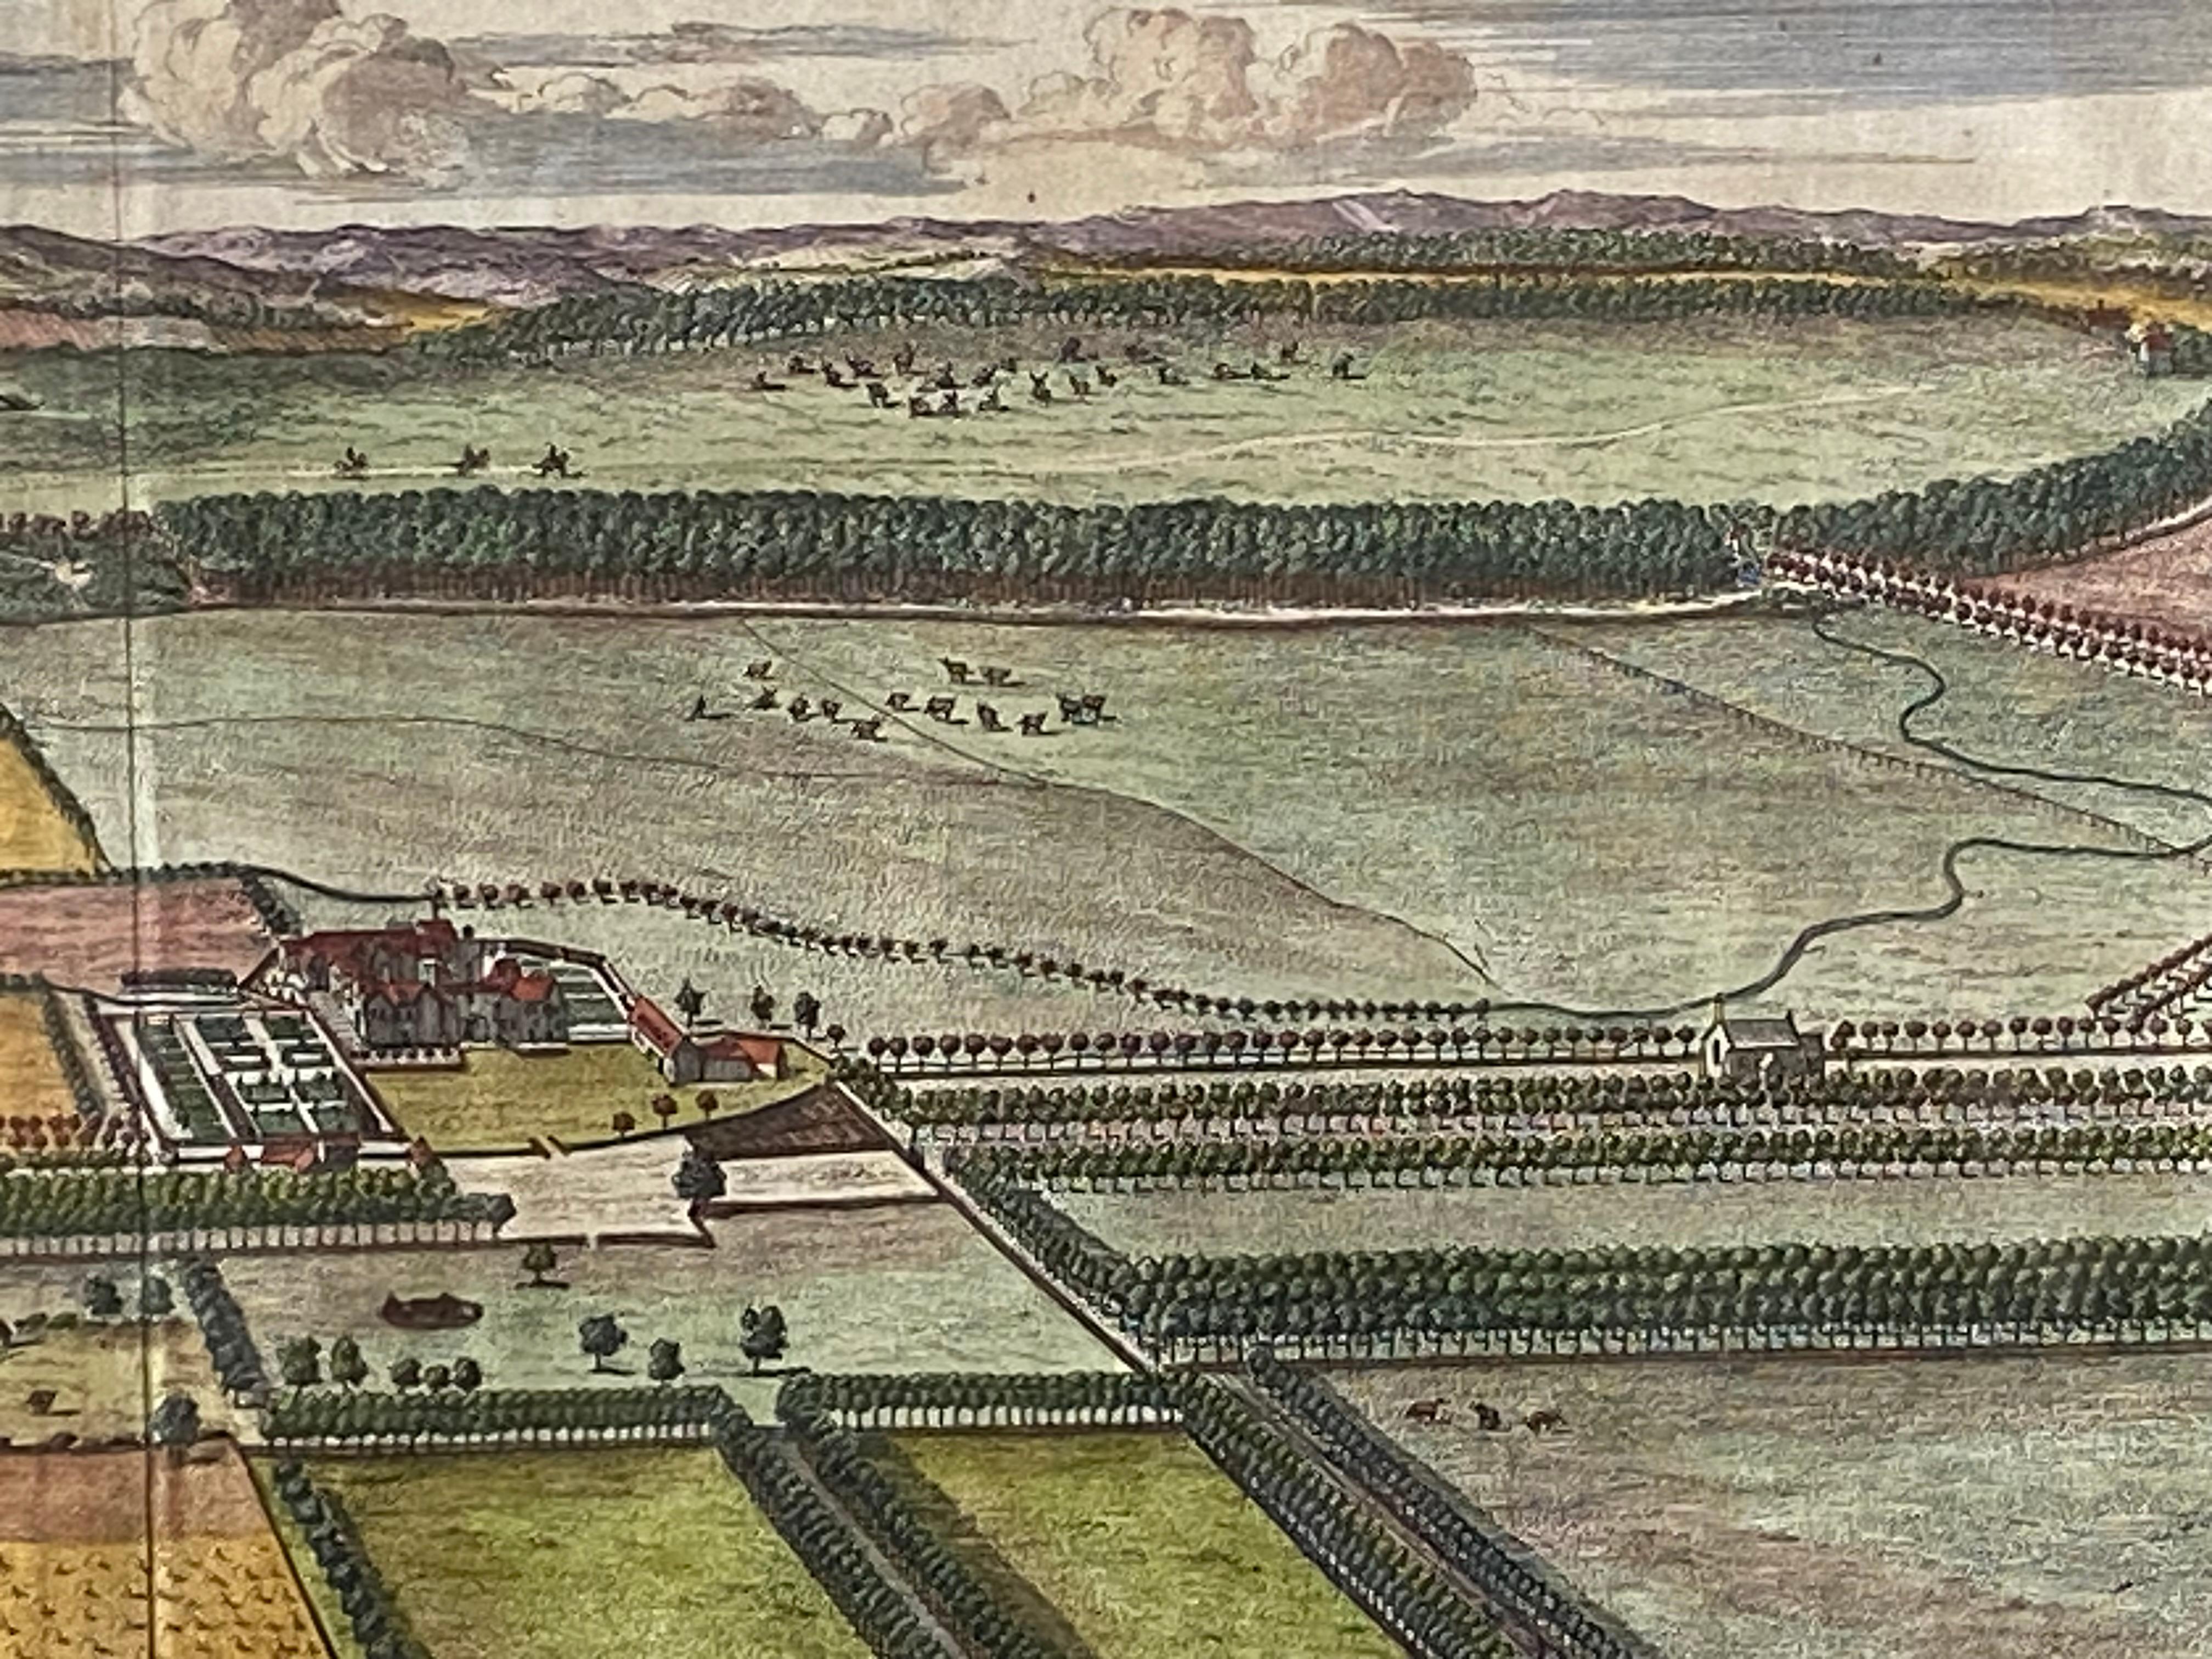 An original hand colored engraving by Johannes 'Jan' Kip (1653-1722) of Haughton in the County of Nottinghamshire, one of the seats of Prince John Duke of Newcastle, after the drawing by L. Knyff for 'Britannia Illustrata or Views of Several of the